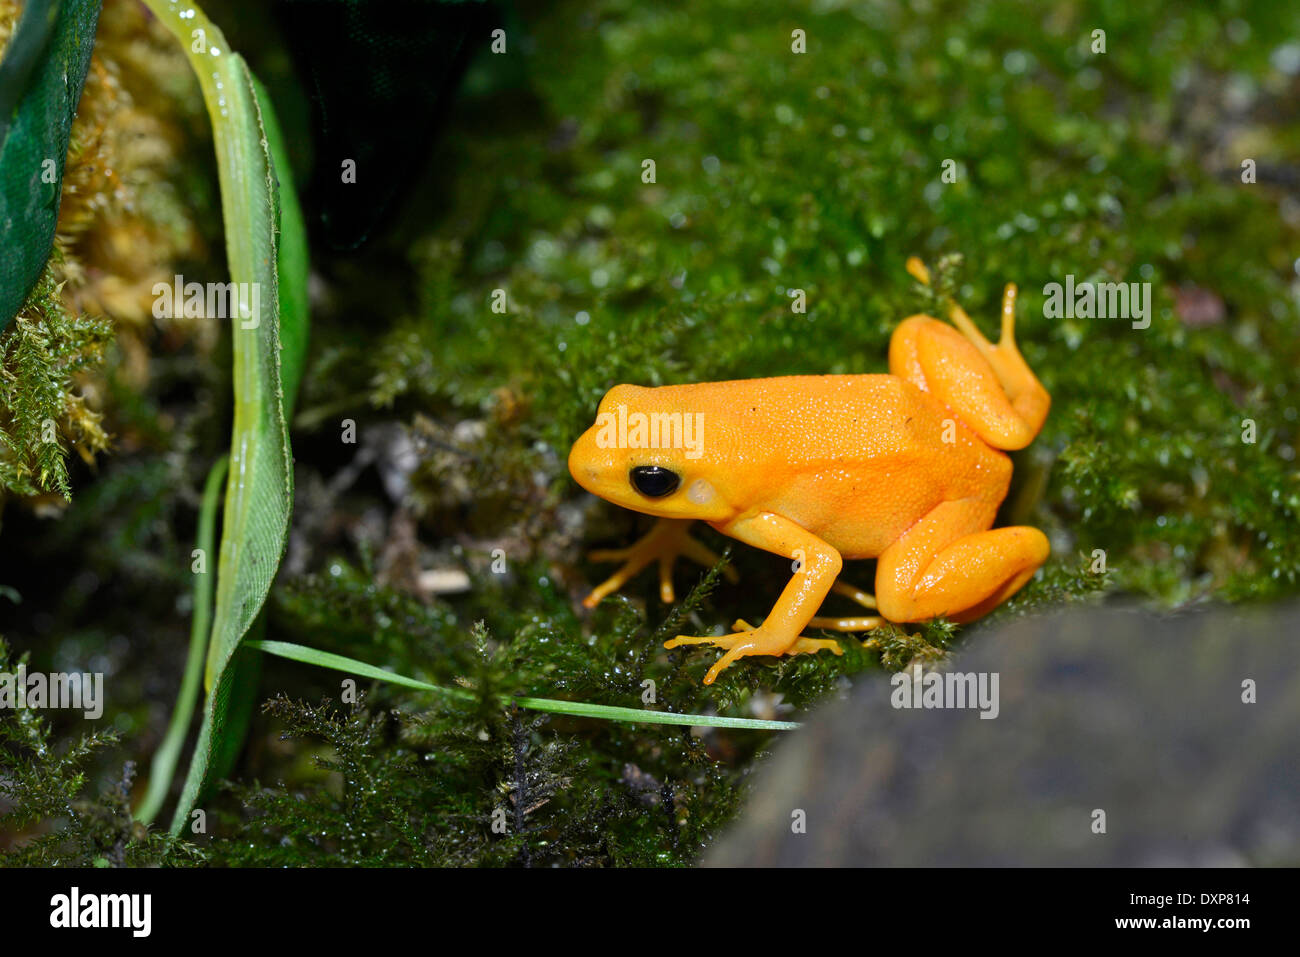 Golden mantella (Mantella aurantiaca). Native to Madagascar and critically endangered in the wild. This is a captive specimen. Stock Photo